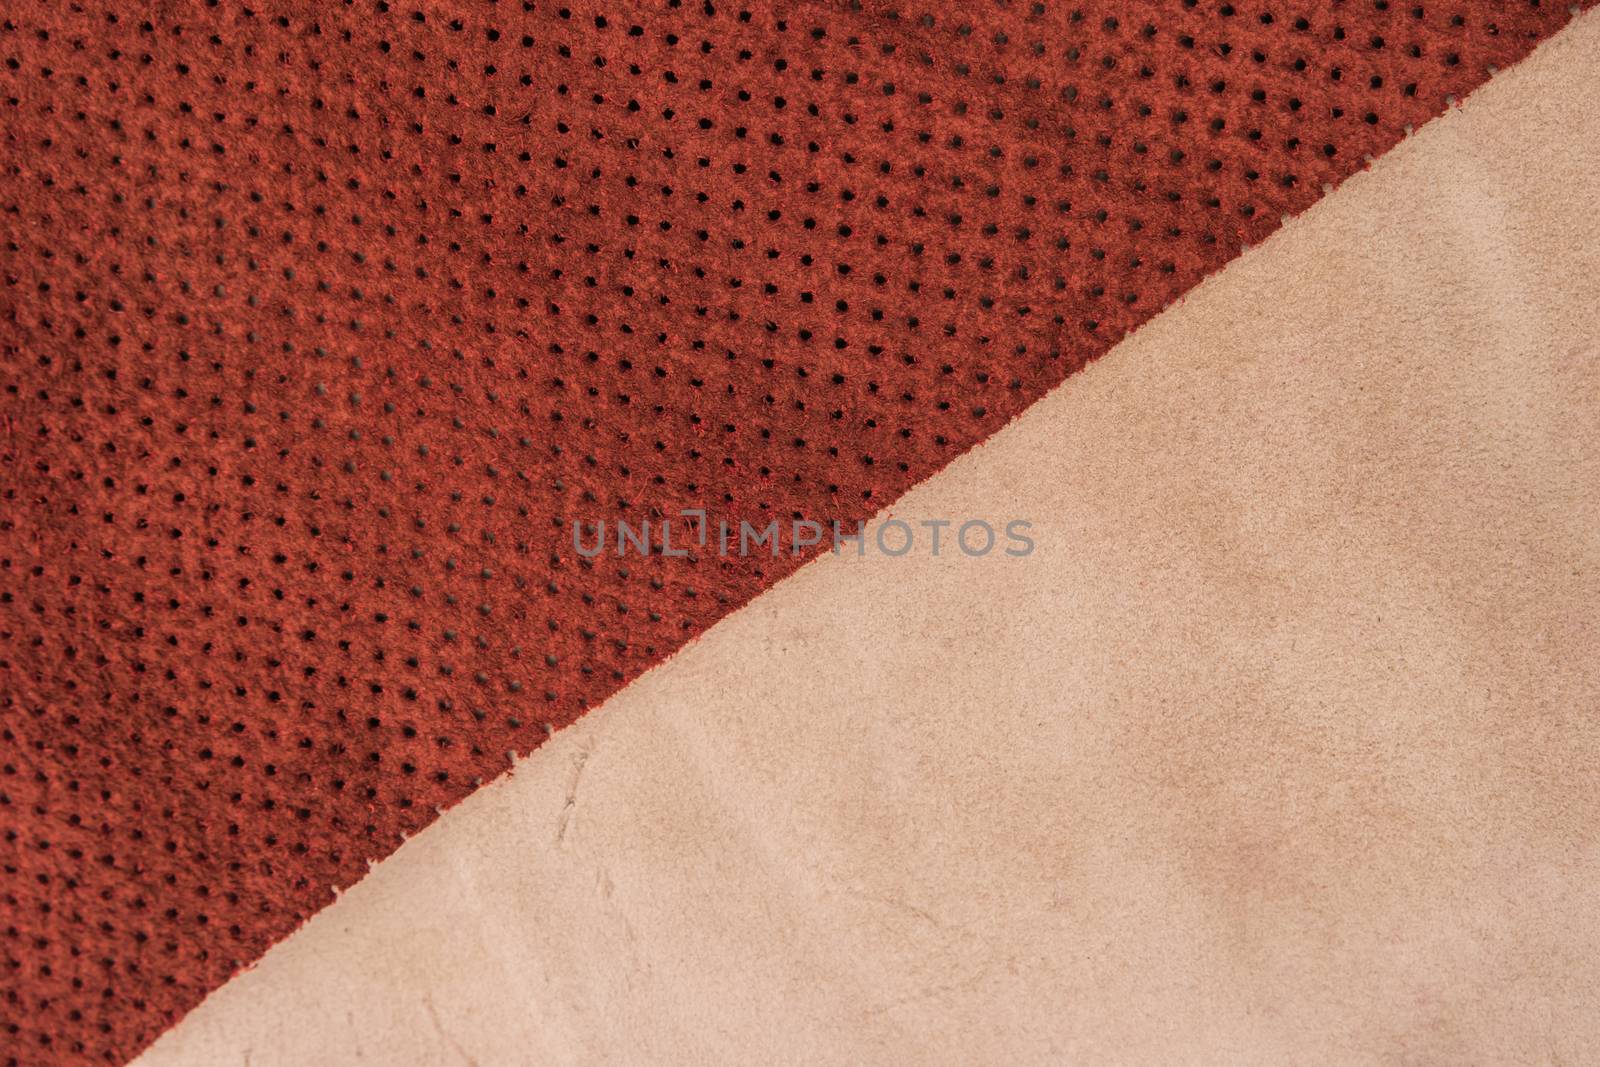 Leather texture closeup by AnaMarques